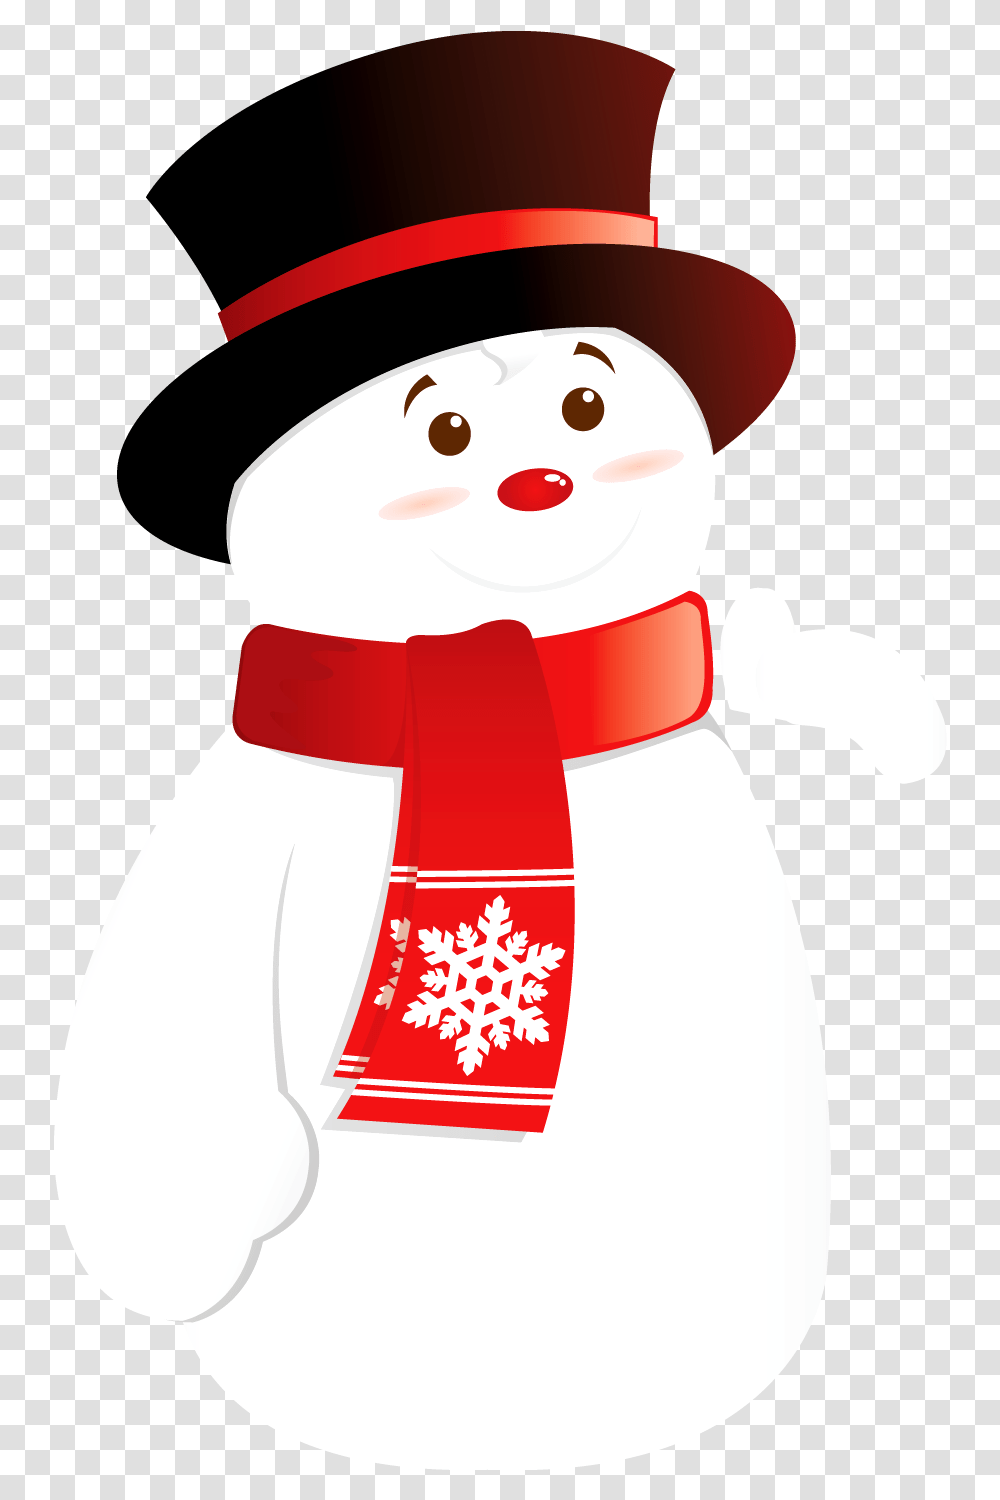 Snowman Clipart Basic Free Christmas Pictures For Commercial Use, Outdoors, Nature, Winter, Clothing Transparent Png